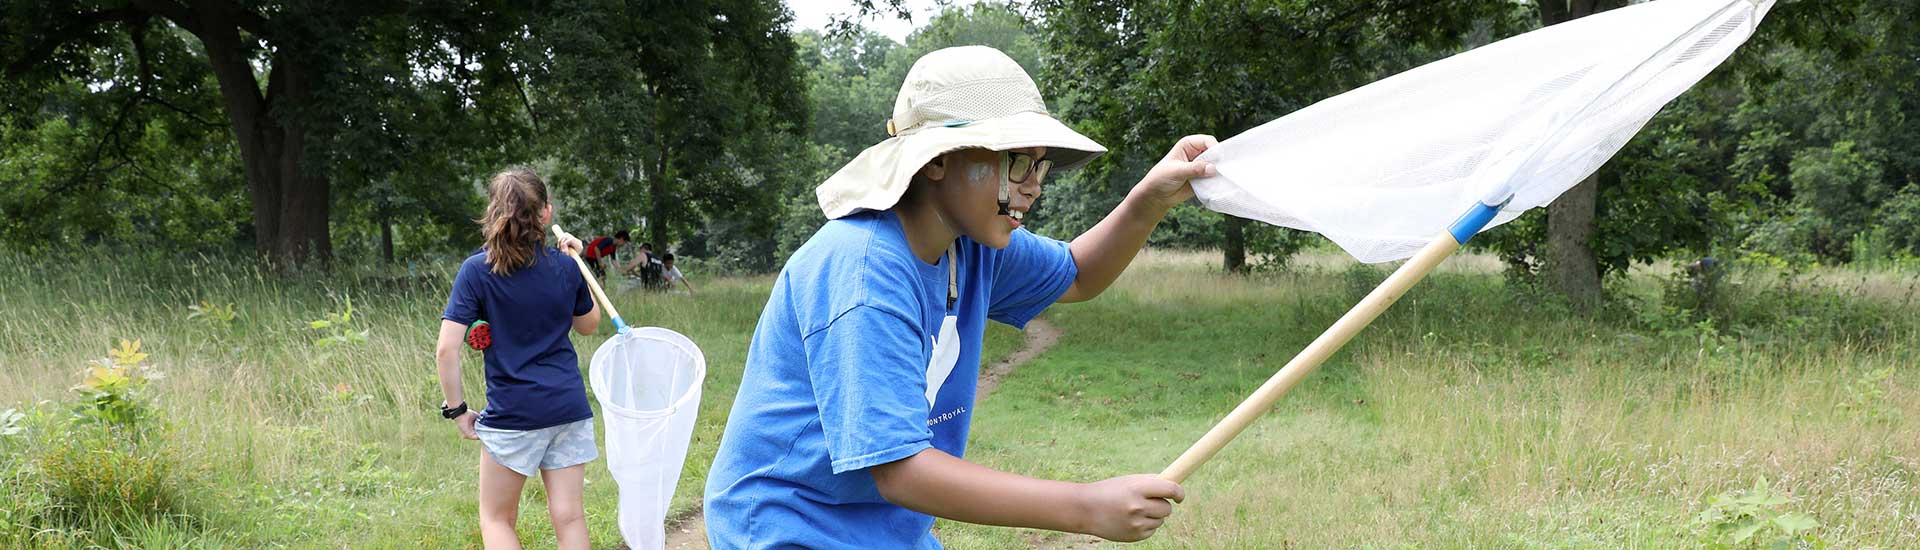 A STEM Nature Camp partipant in the meadow with an insect net